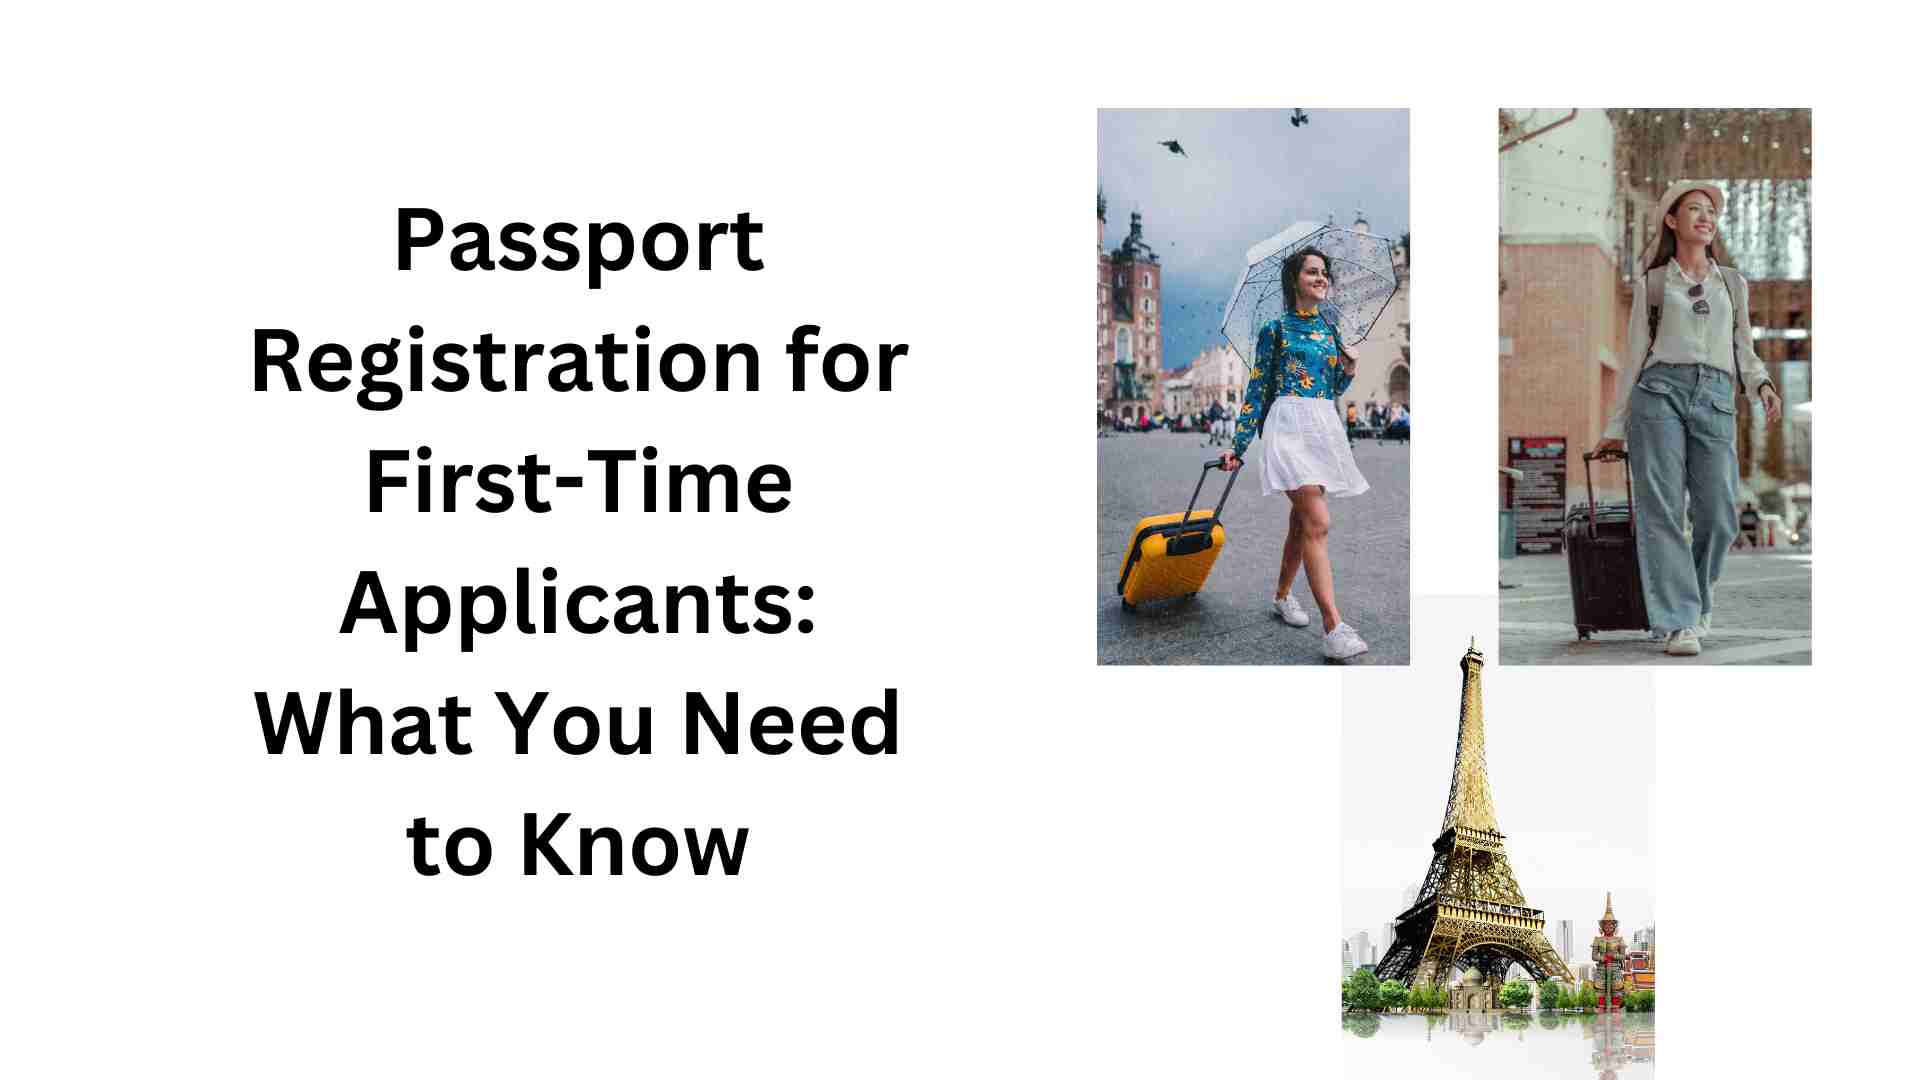 Passport Registration for First-Time Applicants What You Need to Know